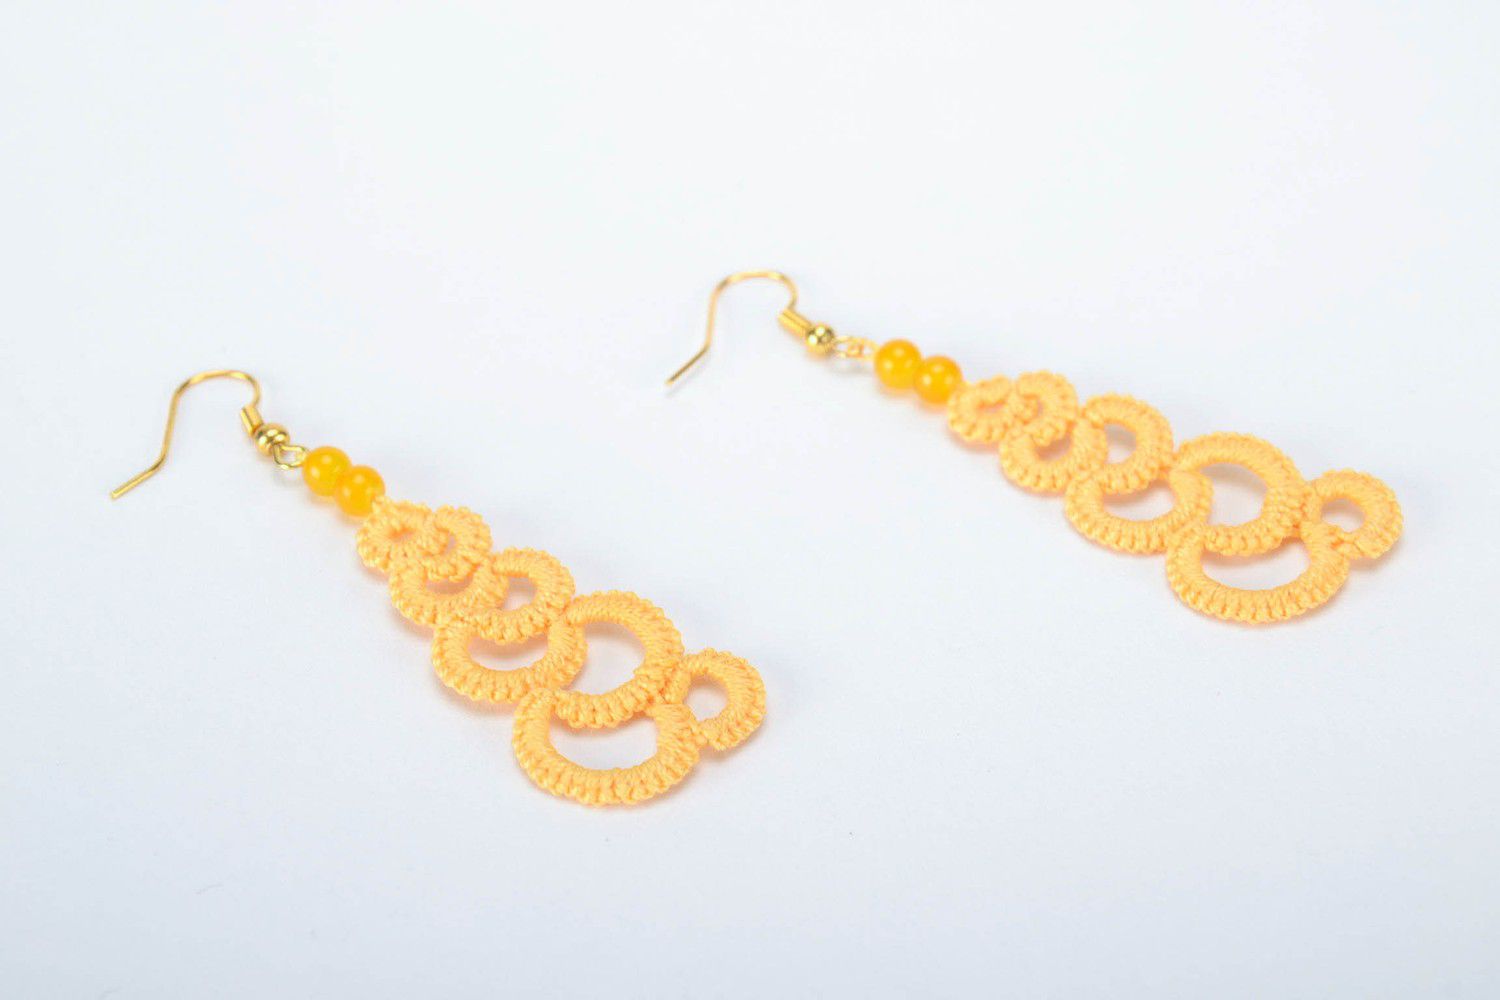 Orange earrings made from woven lace photo 2